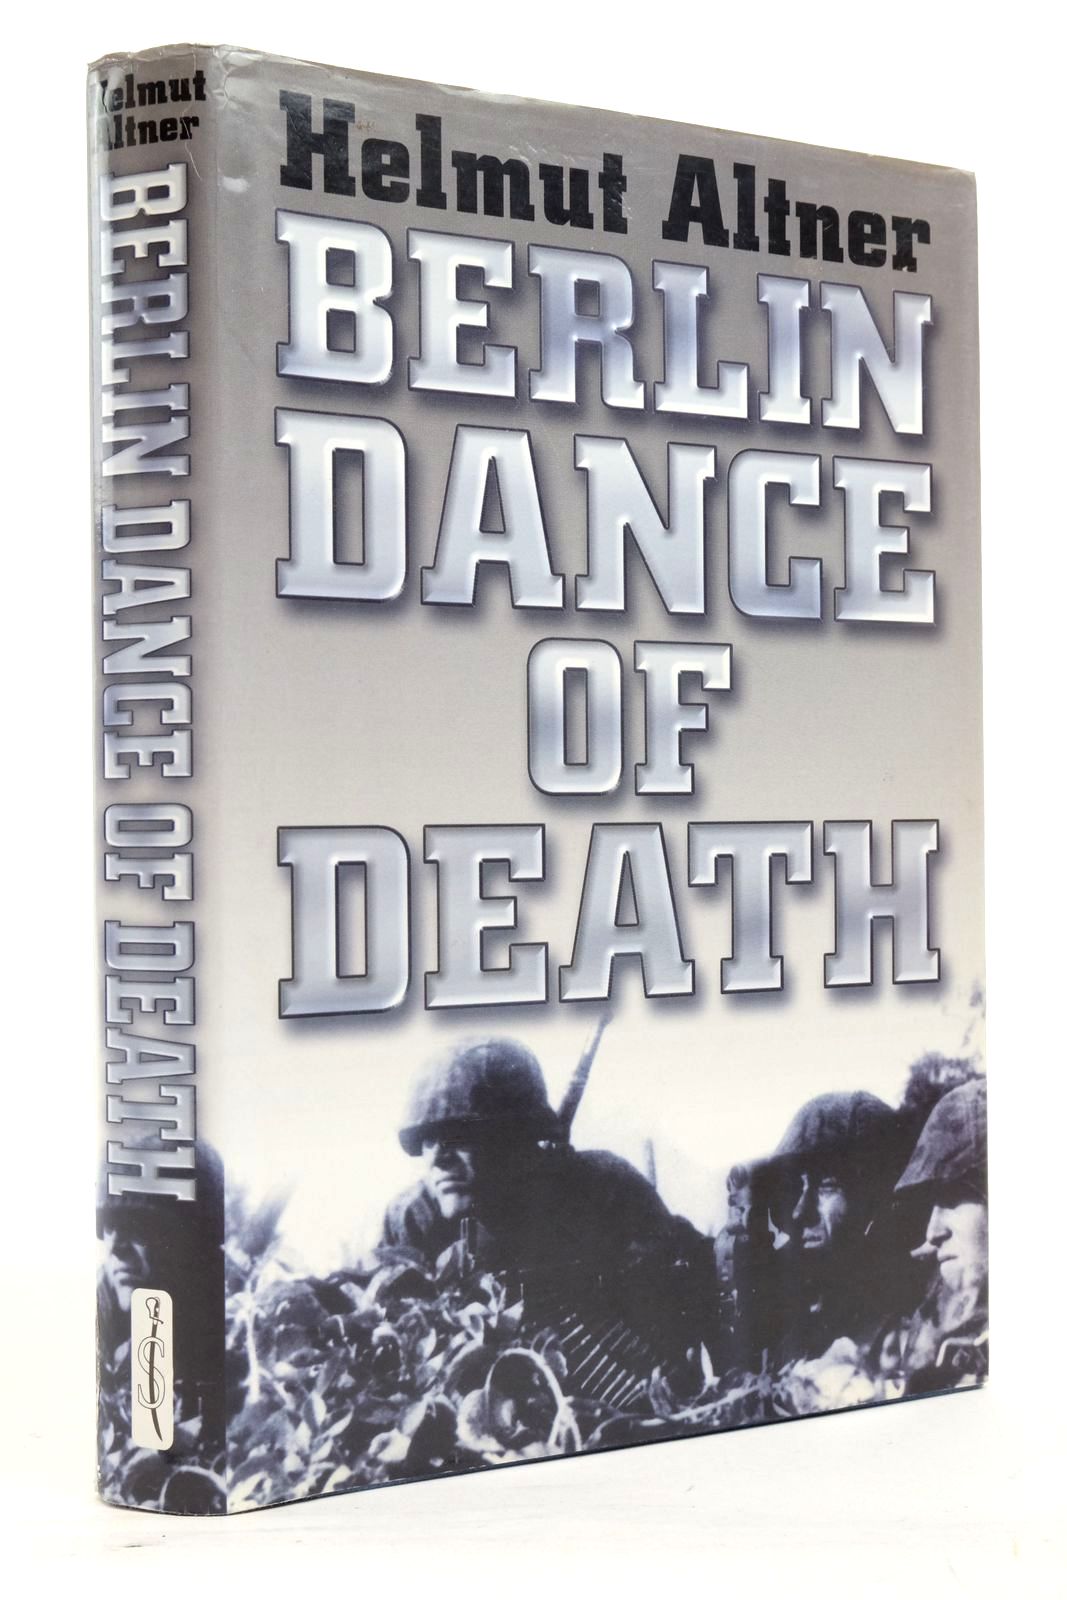 Photo of BERLIN DANCE OF DEATH written by Altner, Helmut Le Tissier, Tony published by Spellmount Ltd. (STOCK CODE: 2138043)  for sale by Stella & Rose's Books